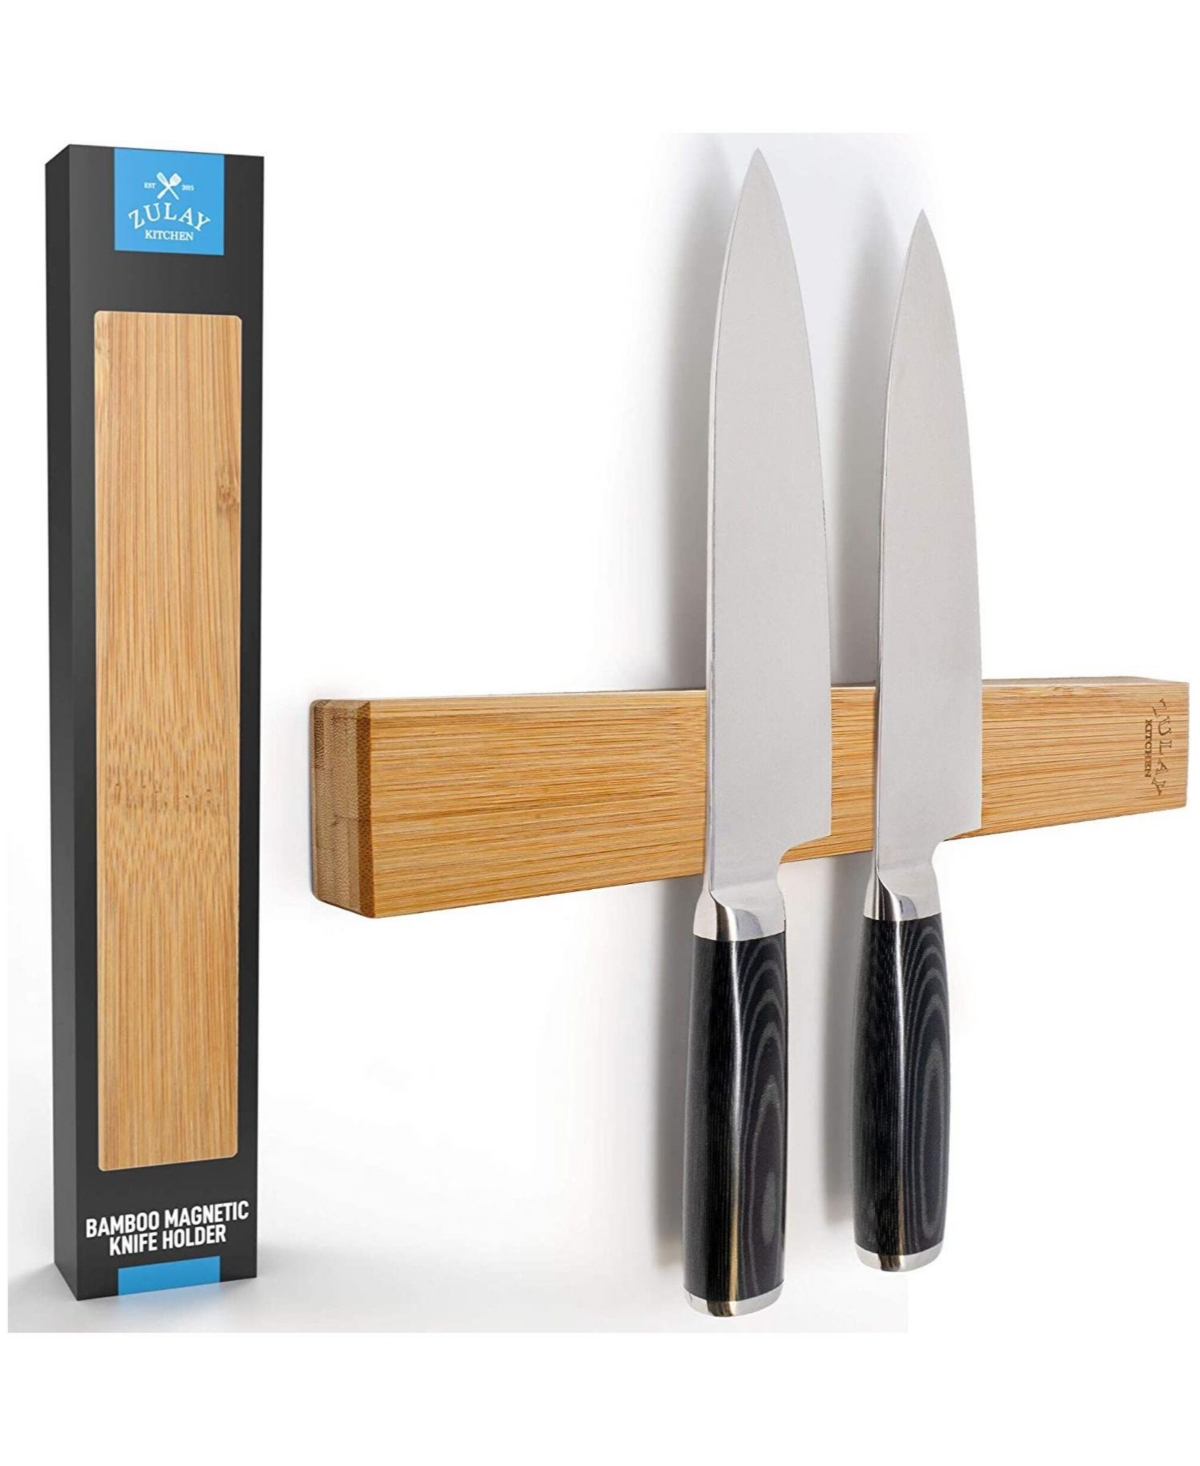 ZULAY KITCHEN MULTIFUNCTIONAL WOOD MAGNETIC KNIFE HOLDER FOR ORGANIZING YOUR KITCHEN